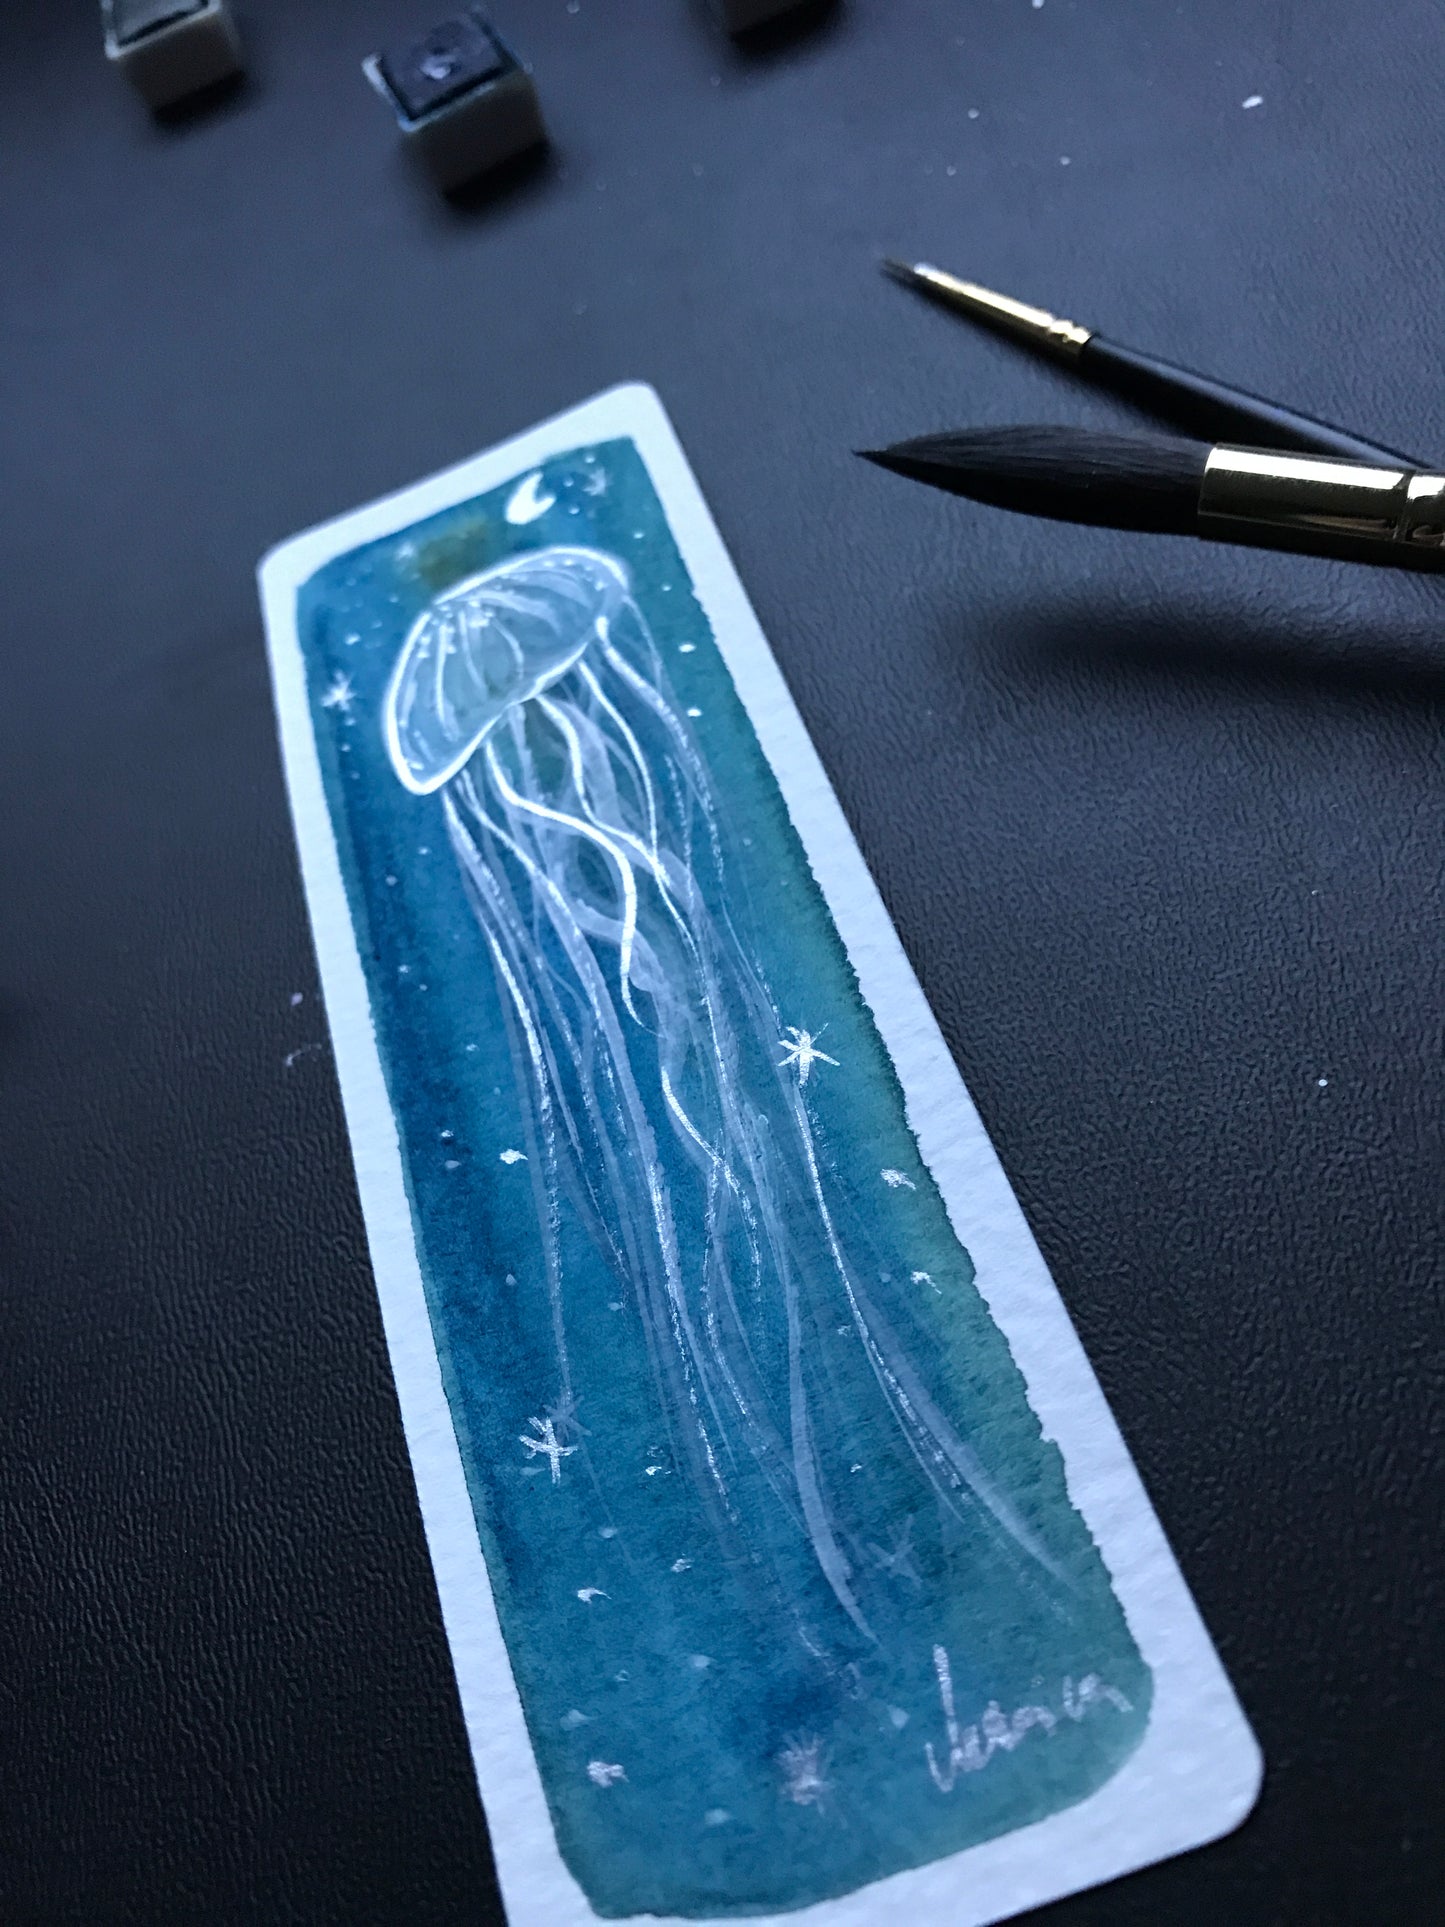 Space Jellyfish Original hand painted bookmark: watercolor with silver details by Marianna Mills